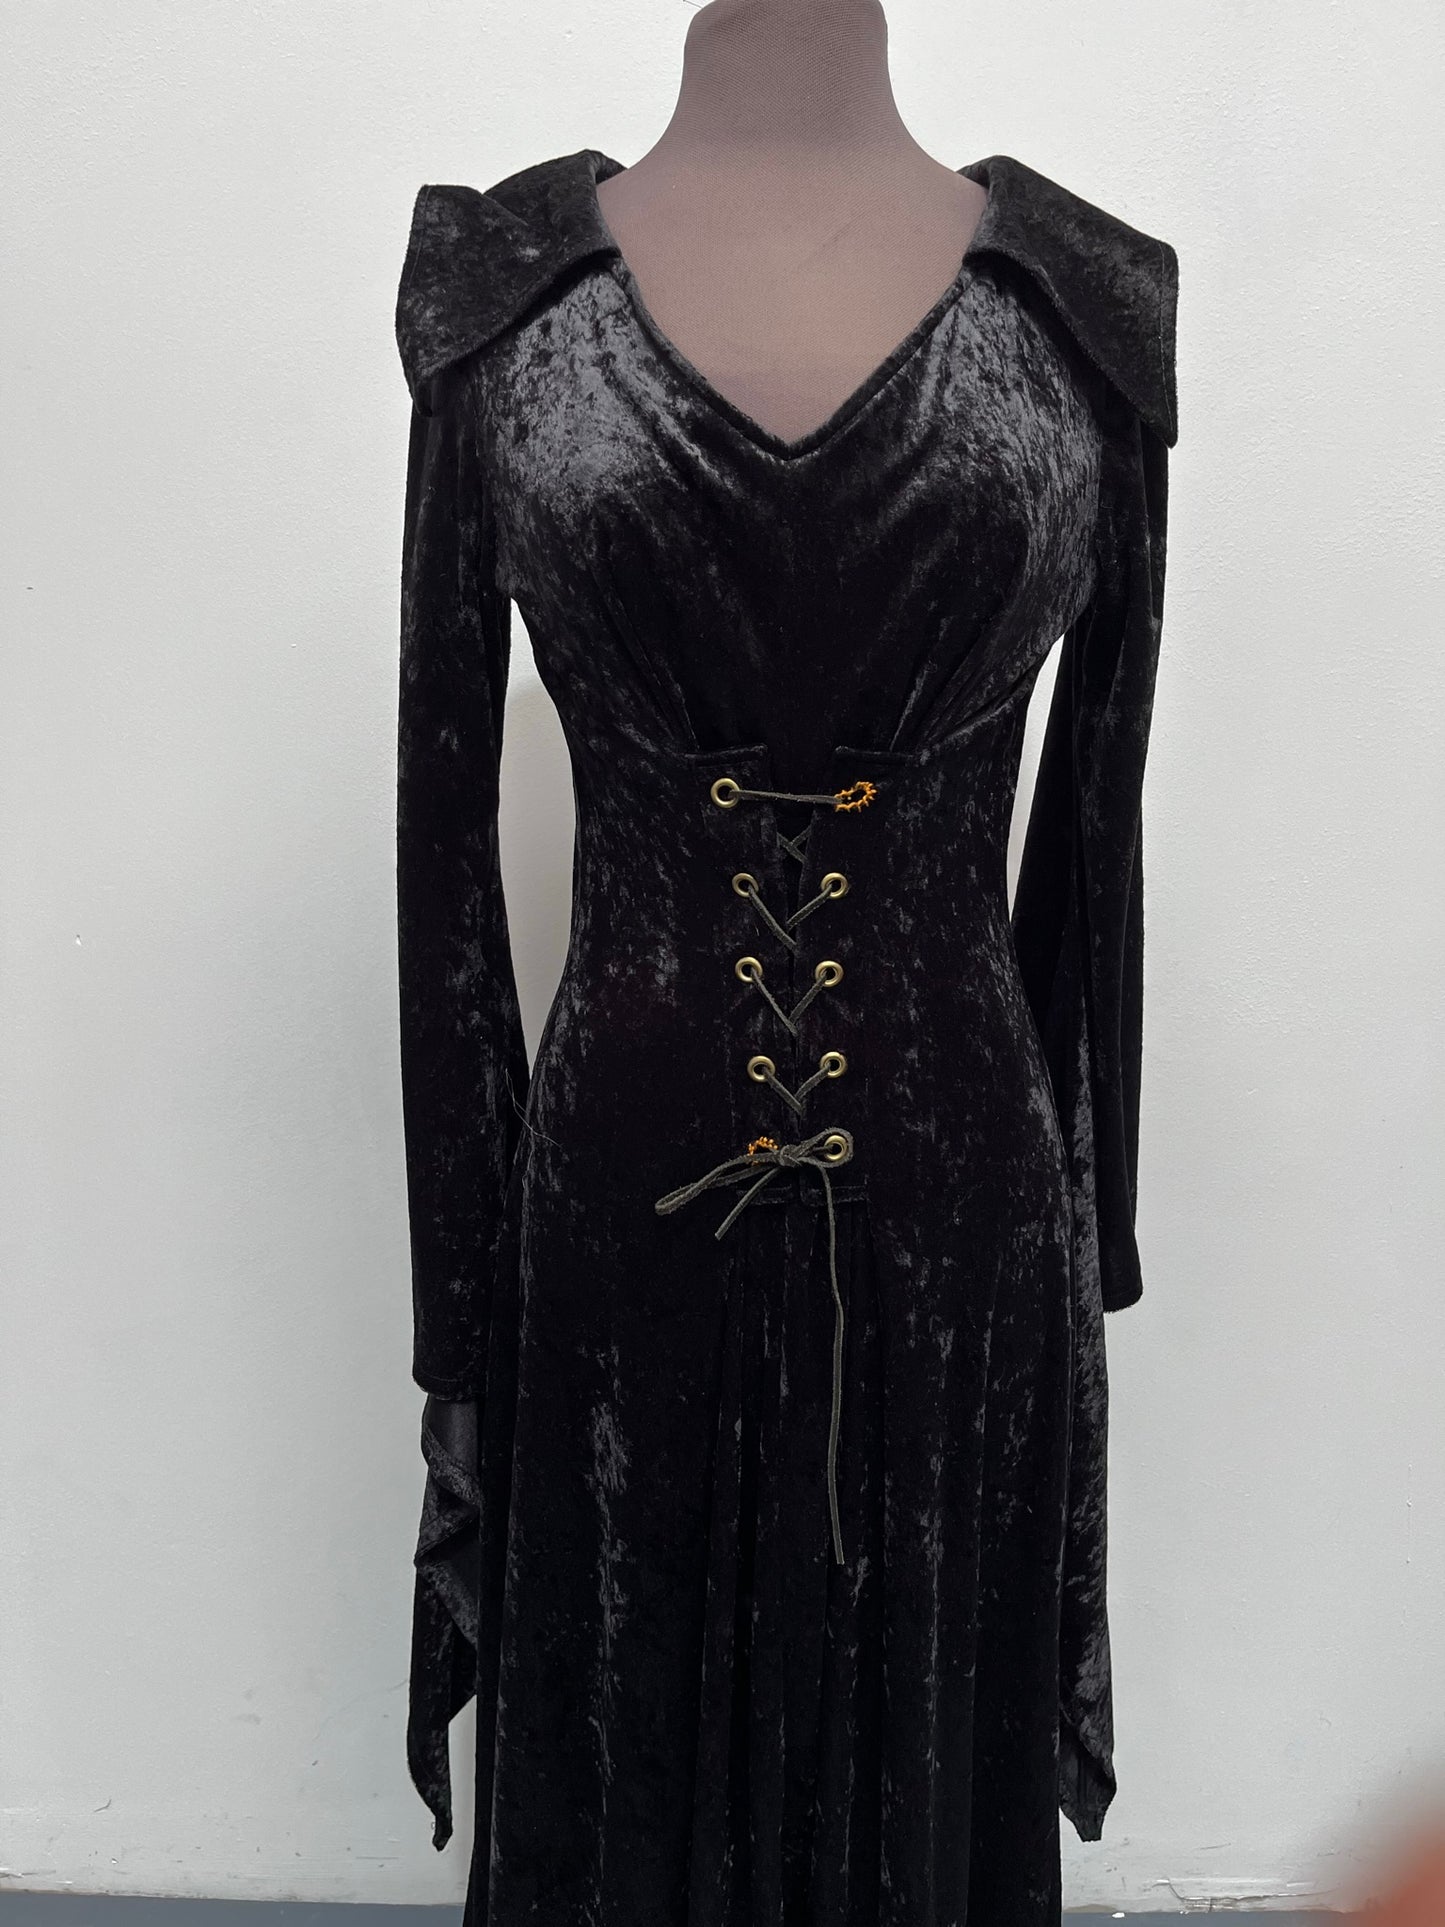 Black Vampire Dress Size S/M - Ex Hire Fancy Dress Costume Witch Medieval Gothic